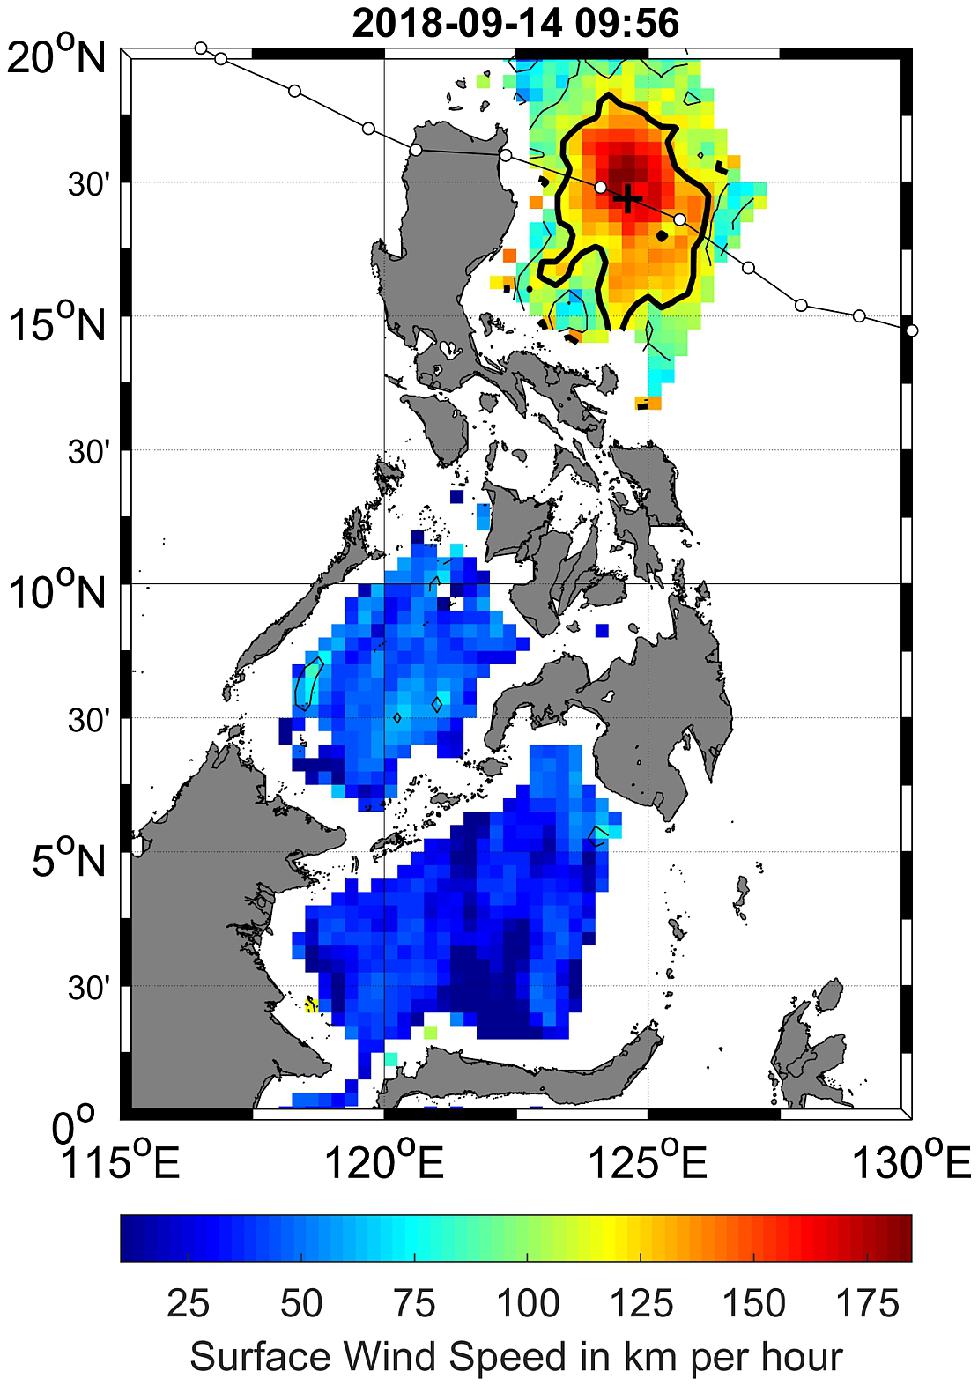 Figure 39: Wind speeds at the base of Typhoon Mangkhut near the Philippines measured by ESA’s SMOS mission on 14 September 2018. The SMOS microwave radiometer MIRAS, which operates in the L-band, has the unique ability to see through clouds and rain to provide reliable estimates of surface wind speeds in intense storms (image credit: Ifremer)